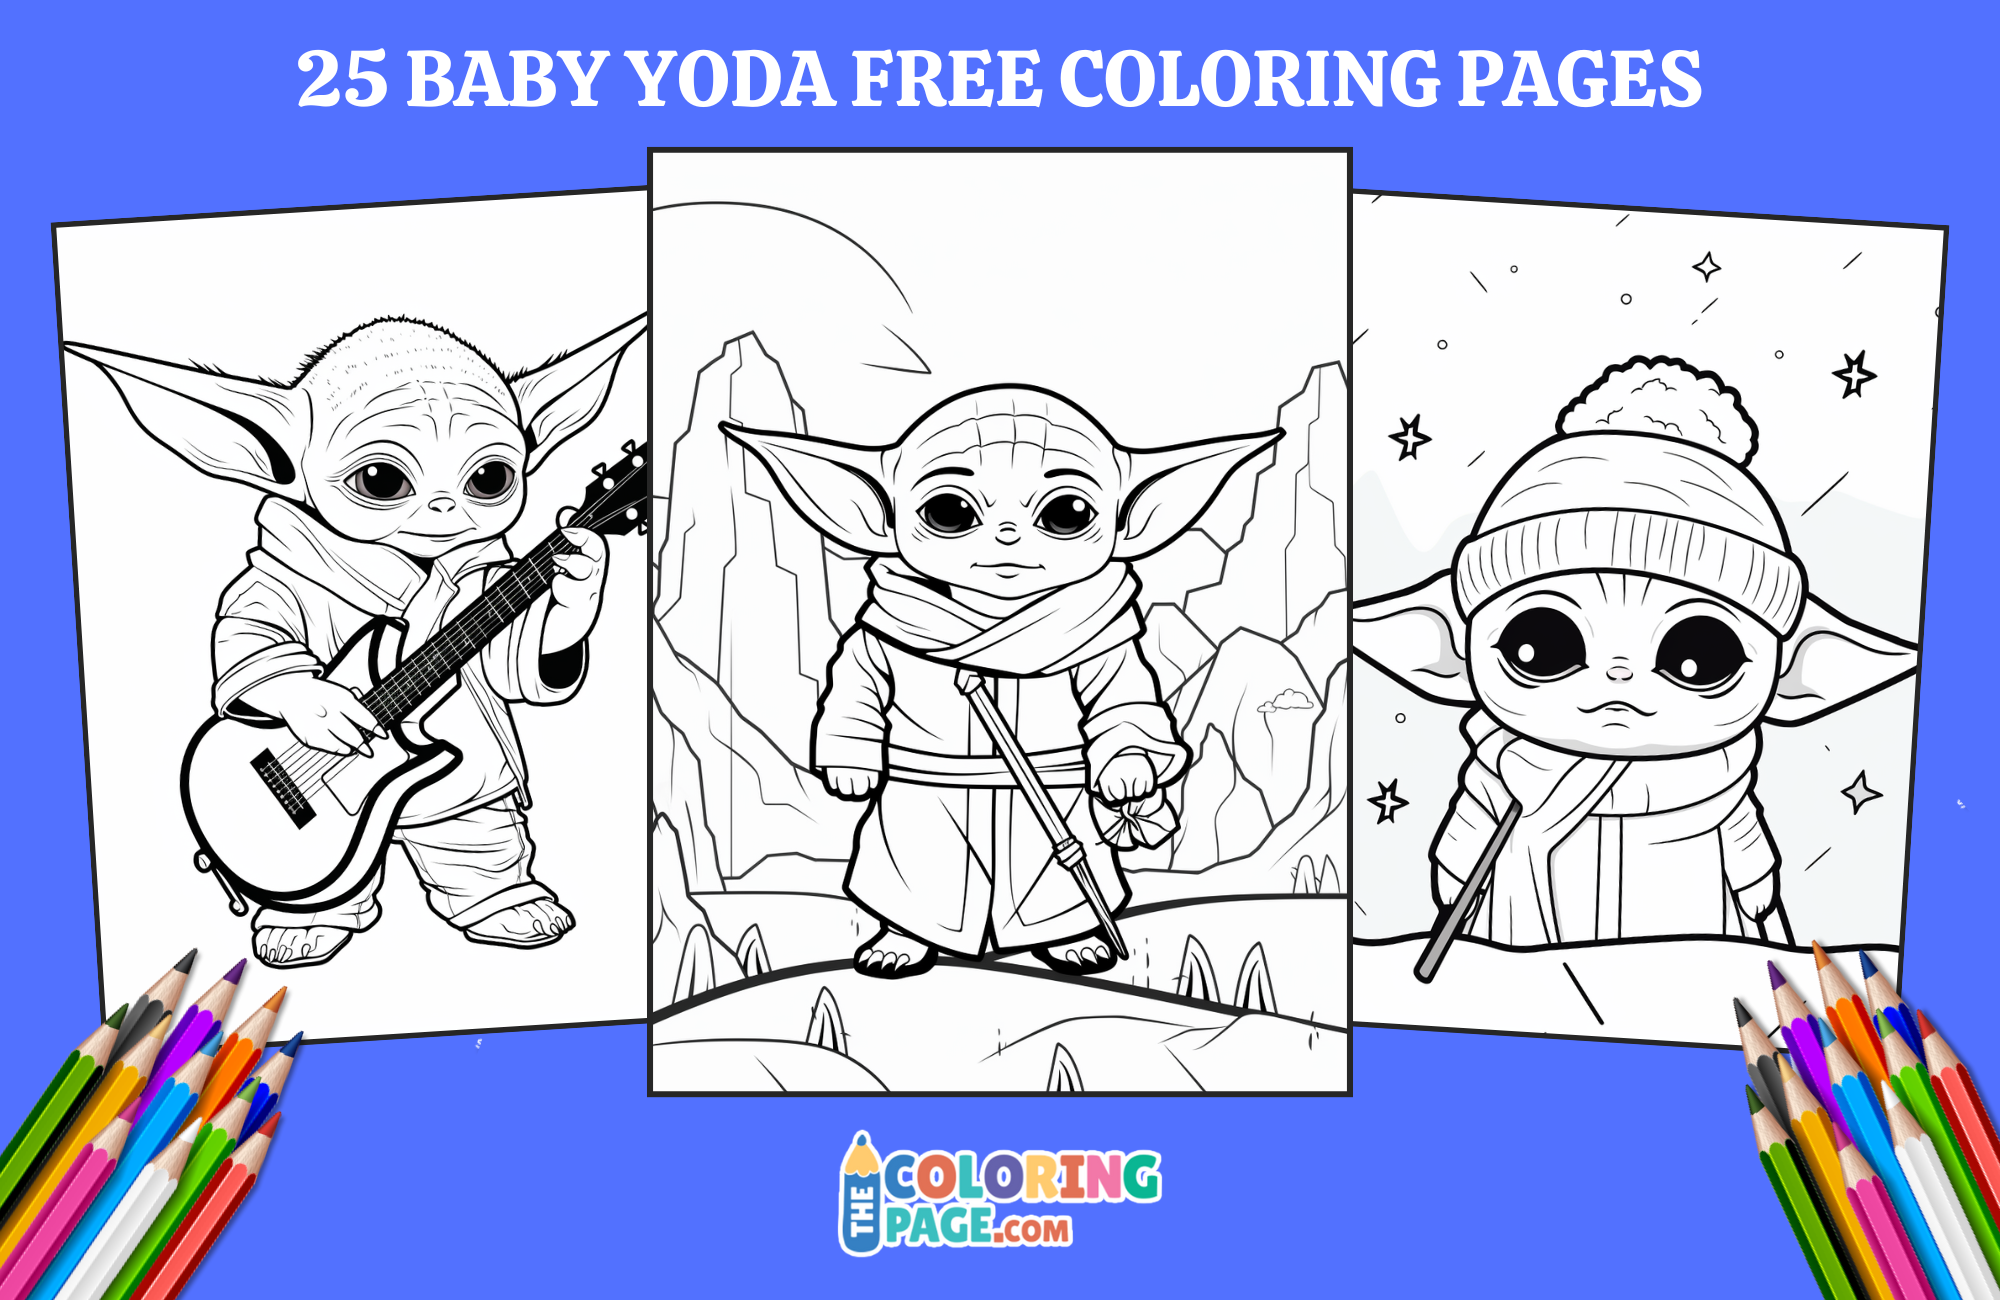 25 Baby Yoda Coloring Pages for kids